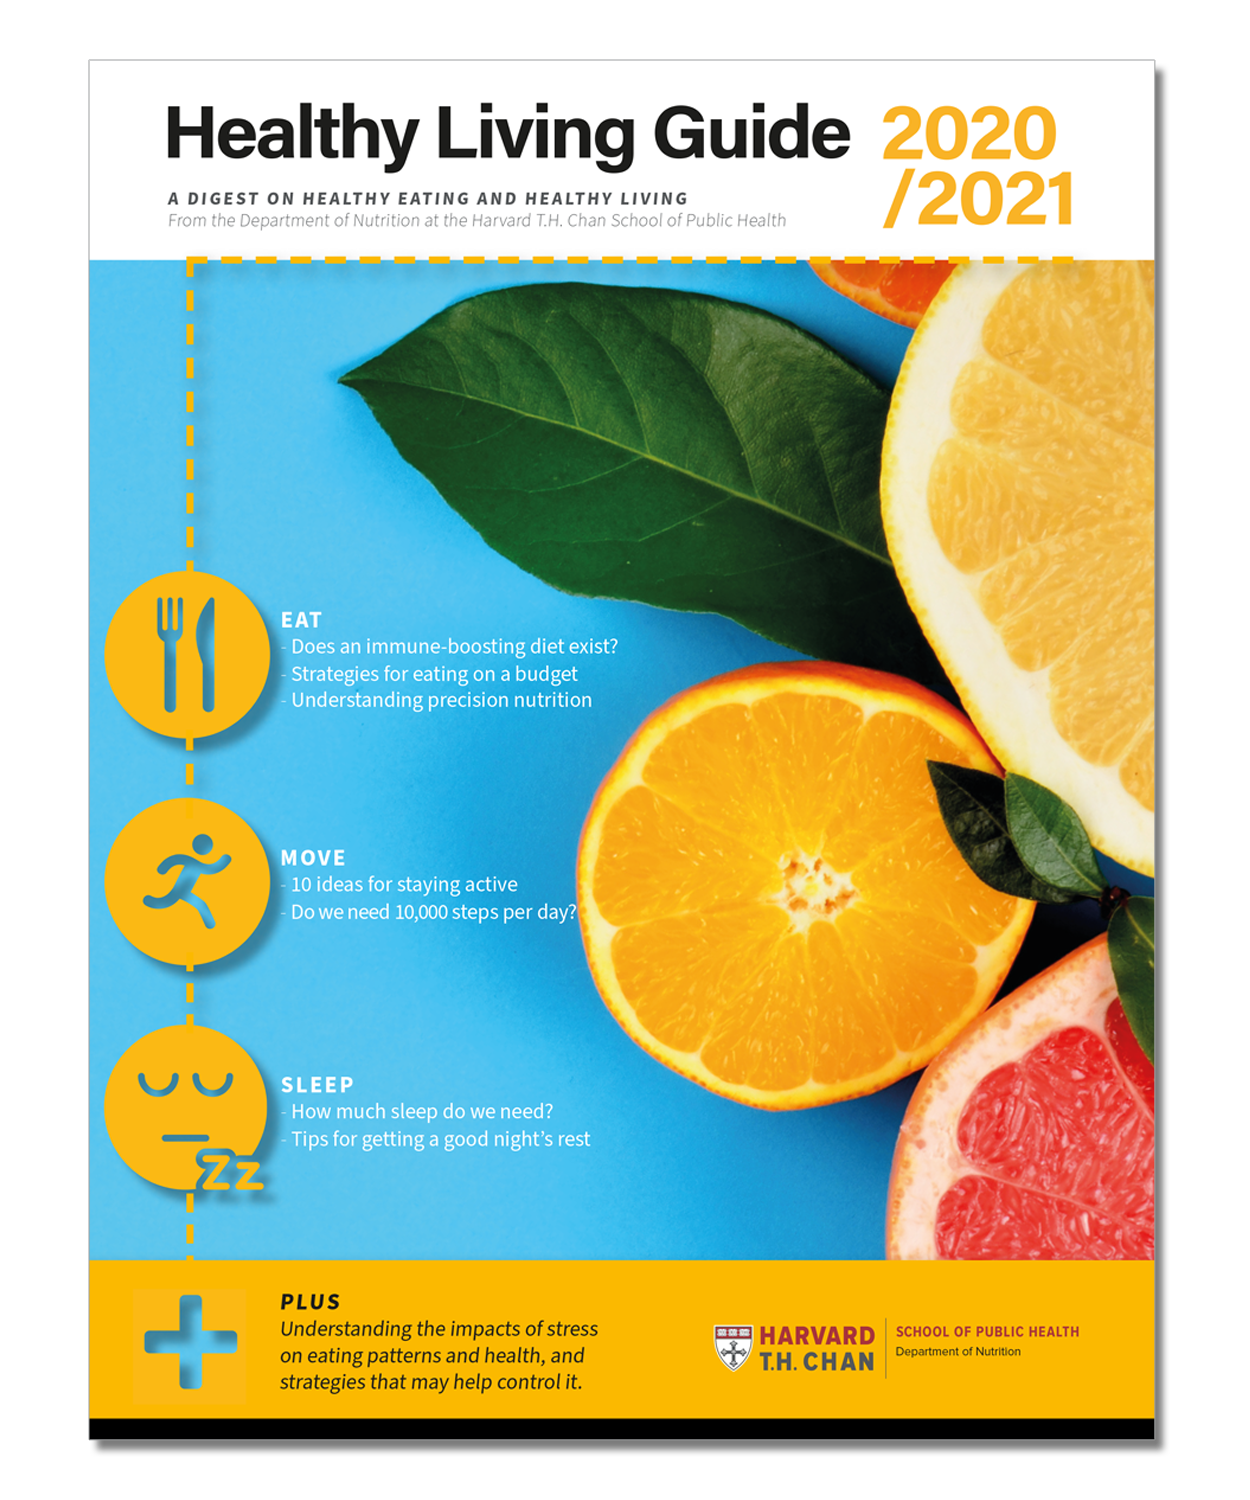 Cover image of the Healthy Living Guide downloadable PDF 